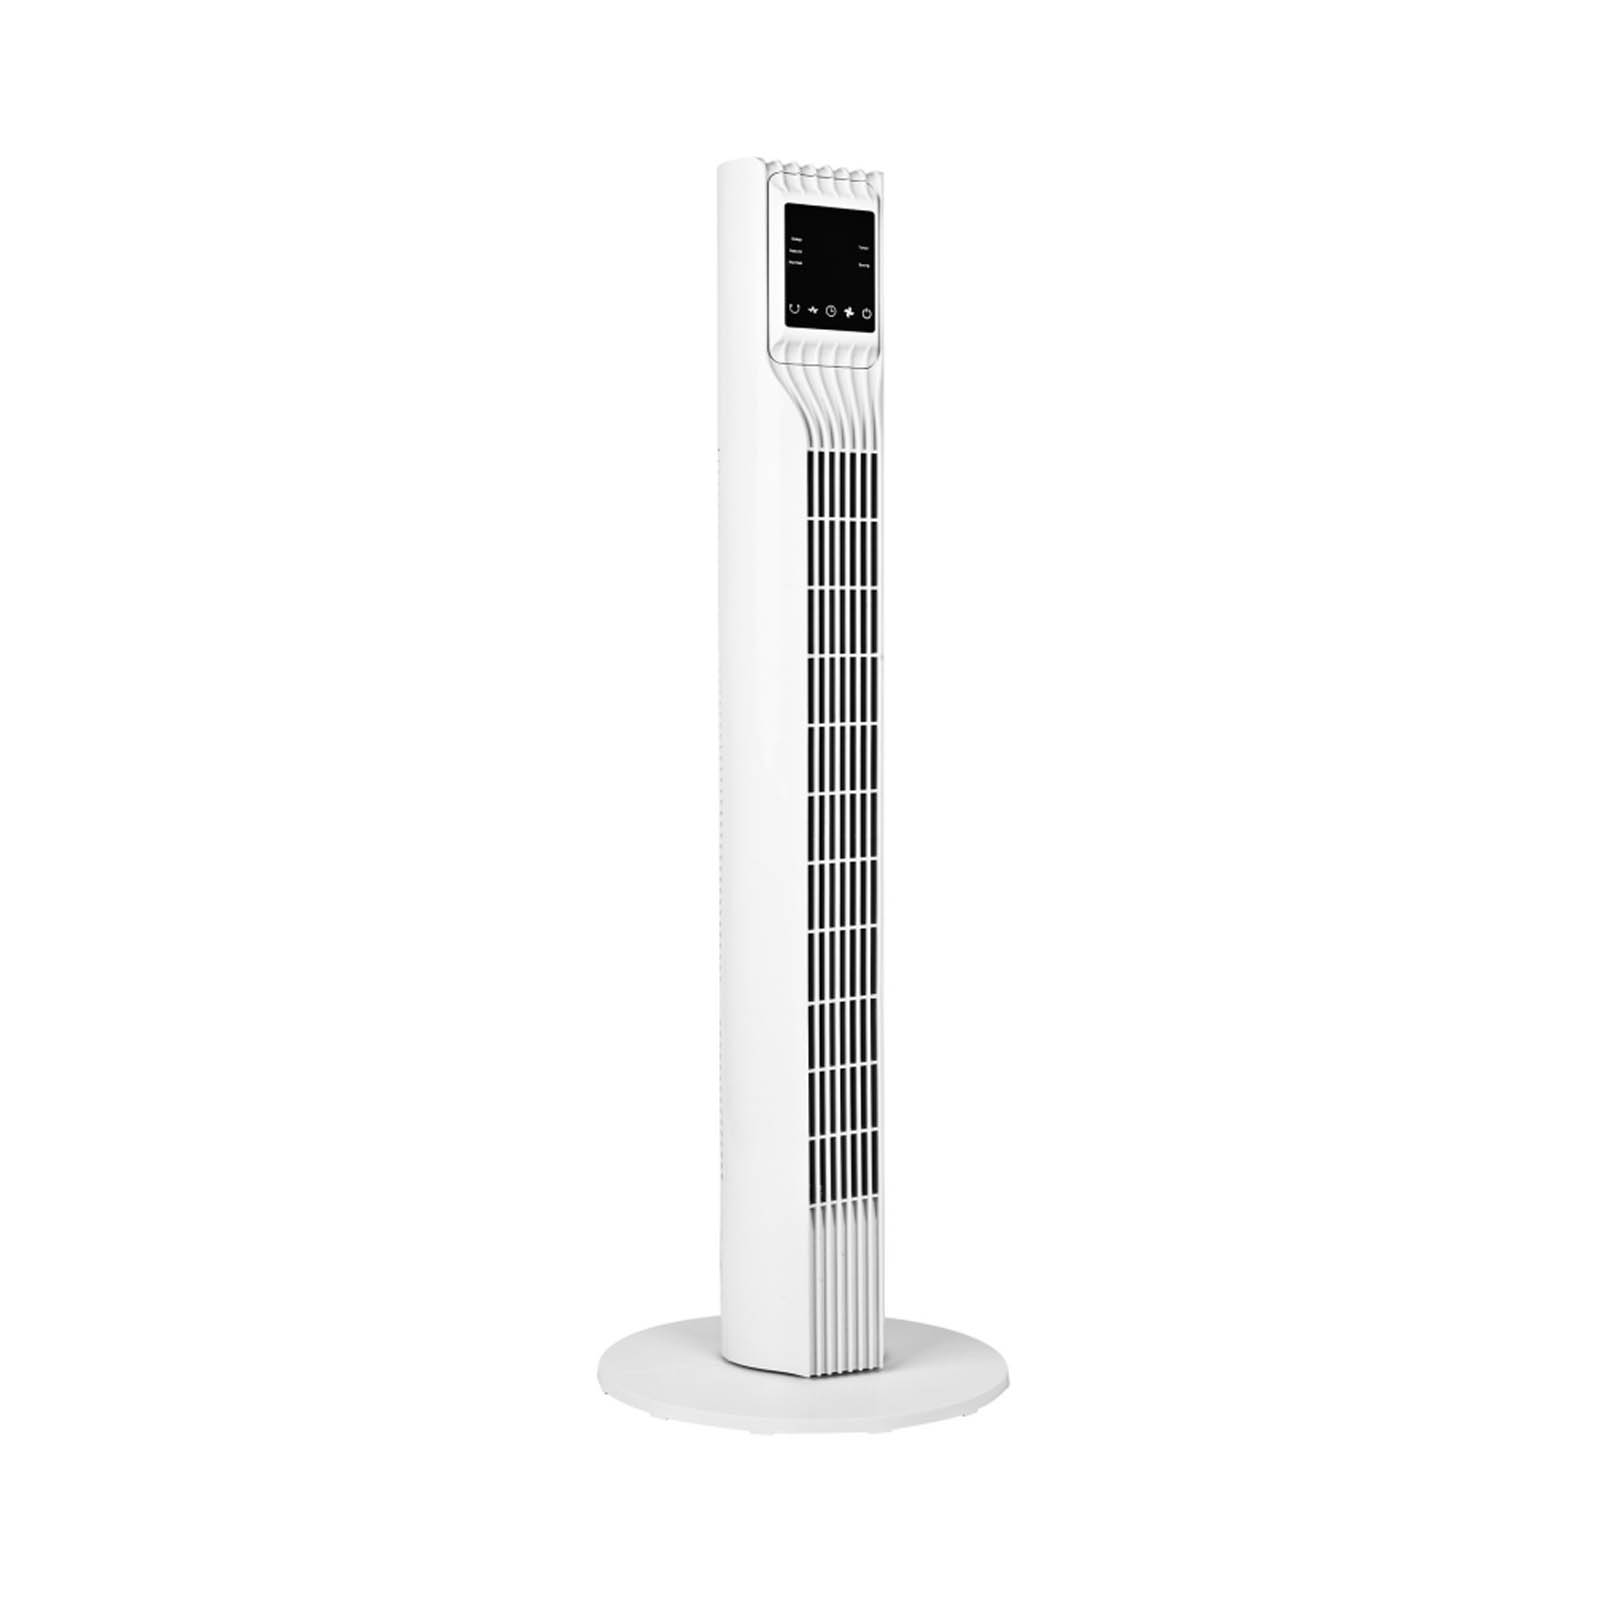 FS-C01 HOWSTODAY 36-inch Tower Fan with Remote Control